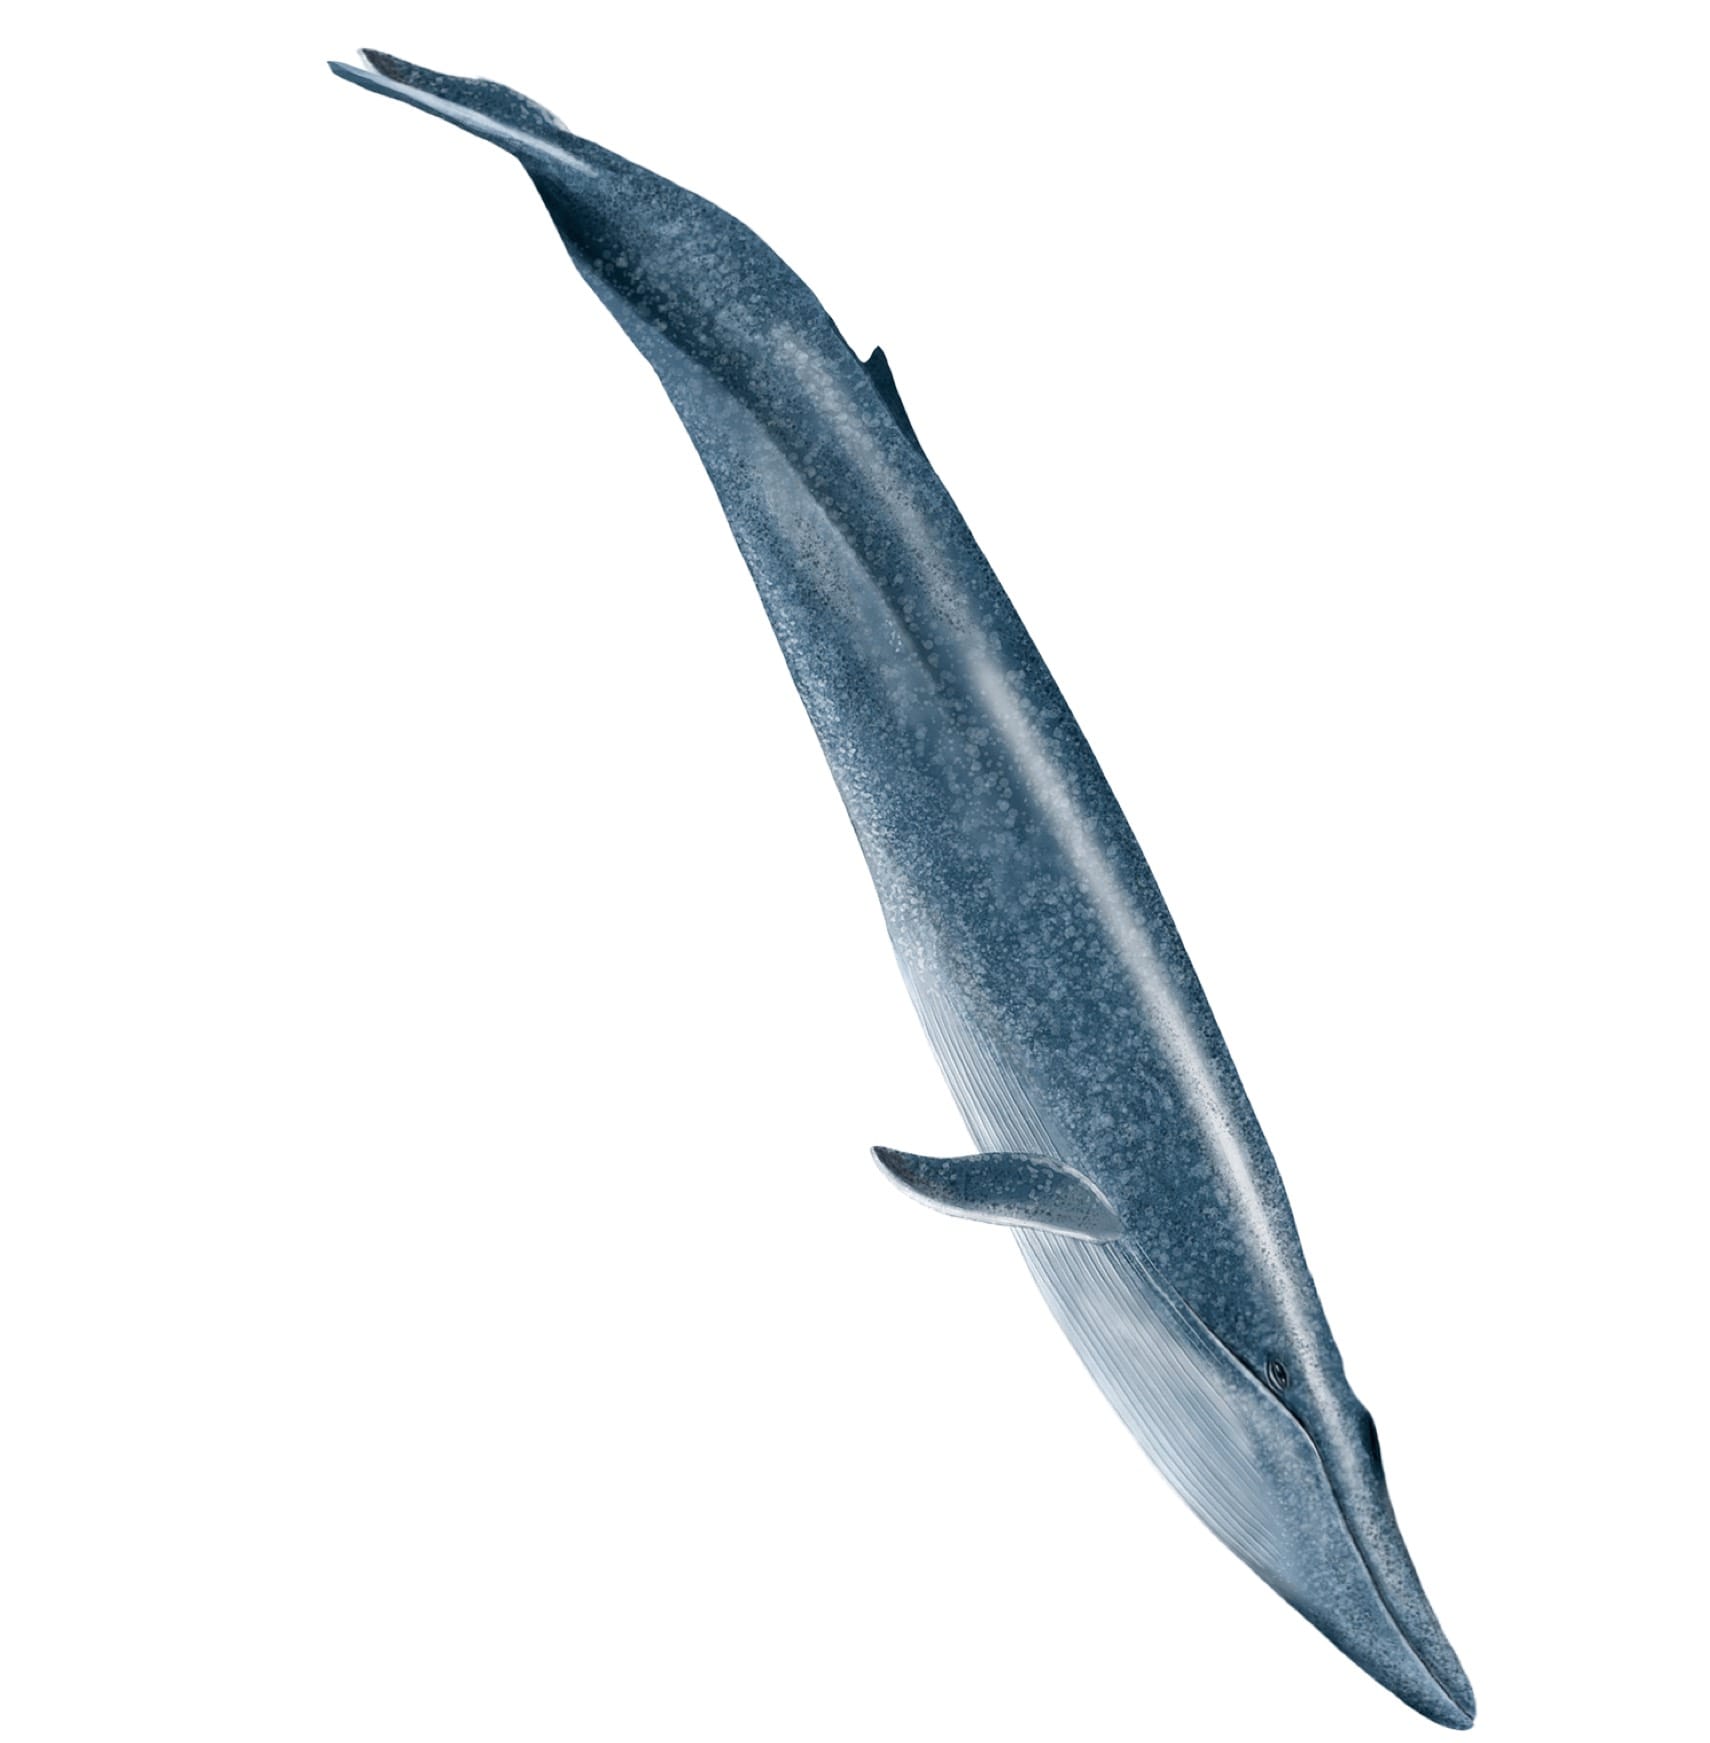 Cass microsite, diving whale